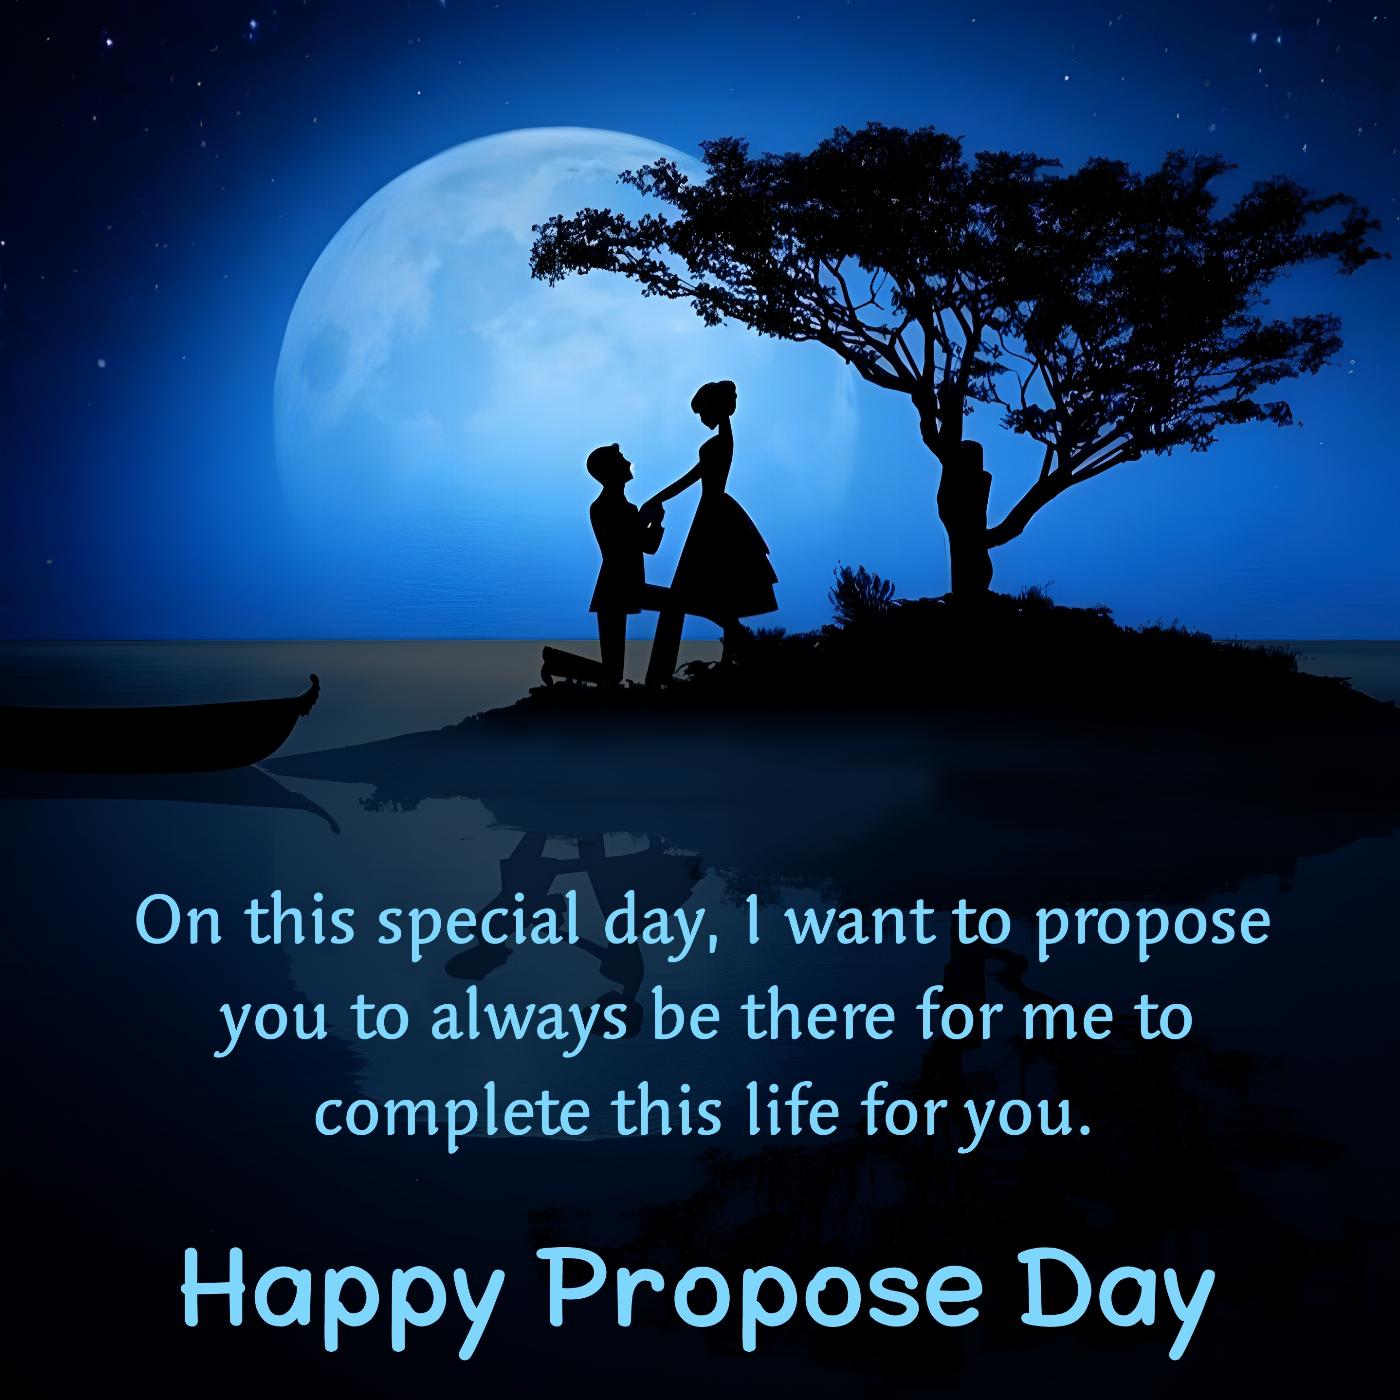 On this special day I want to propose you